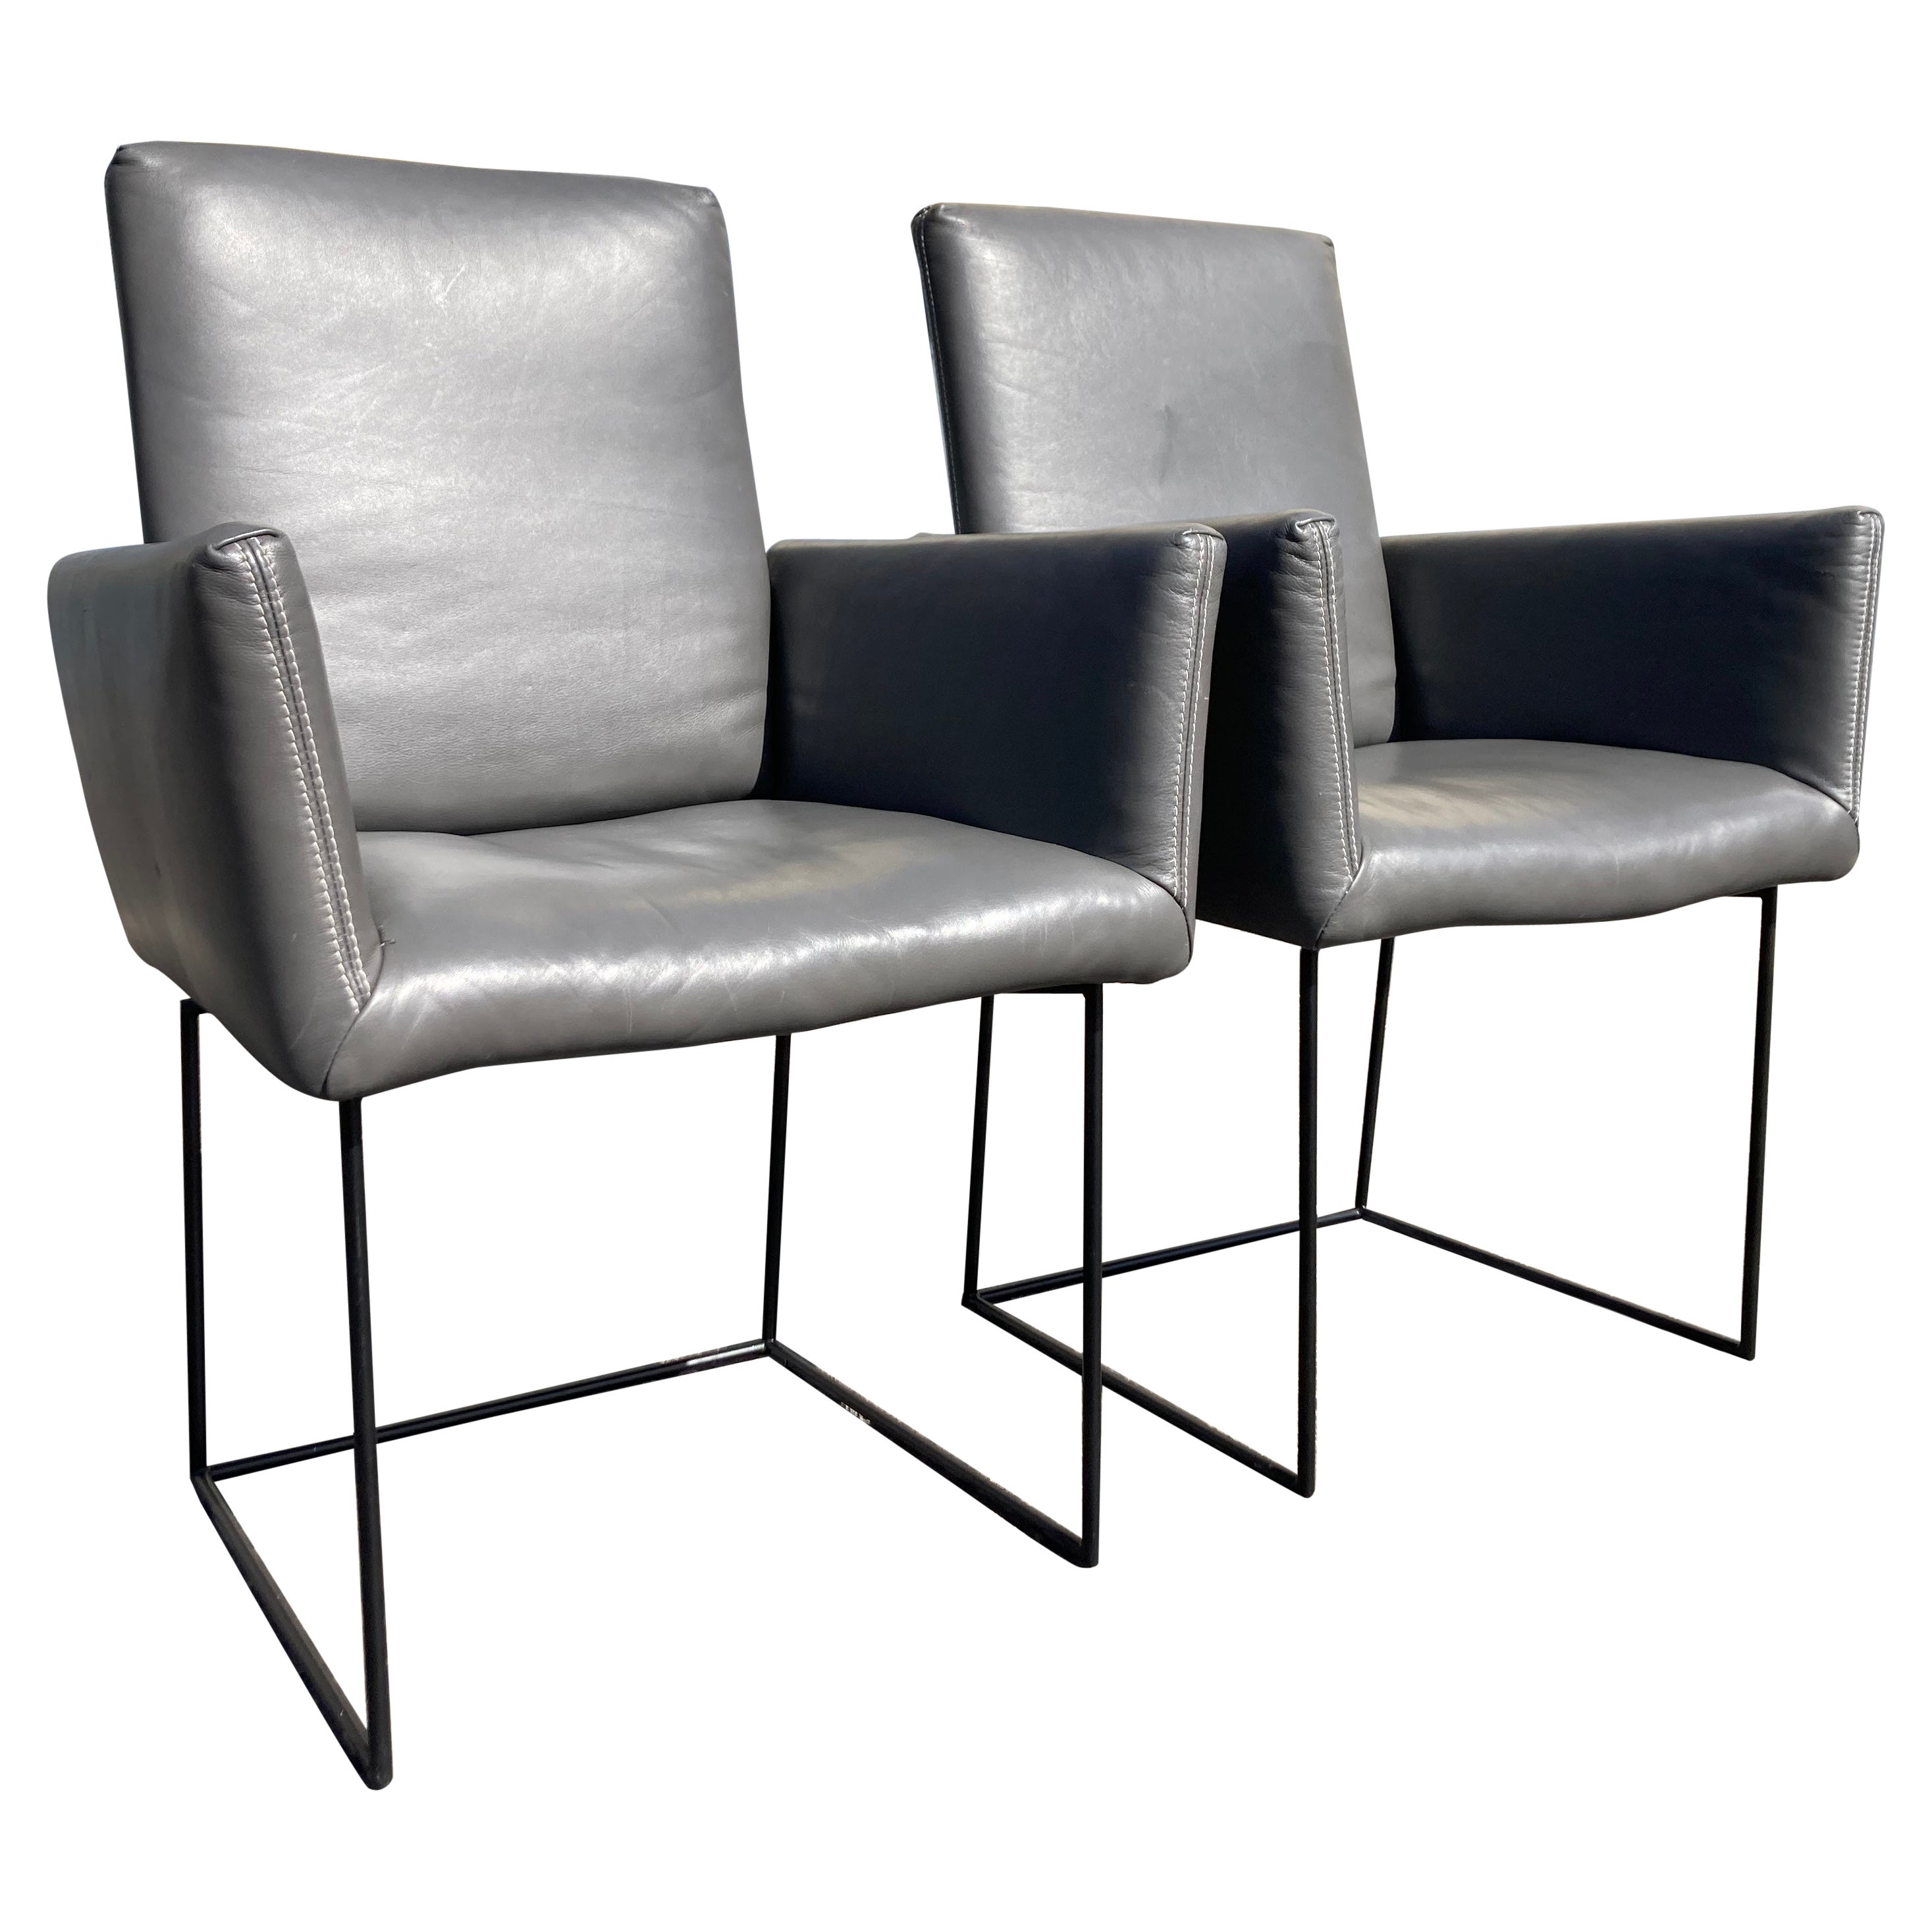 Pair Leather Arm Chairs Designed by KURT BEIER & KATI QUINGER for Bullfrog  For Sale